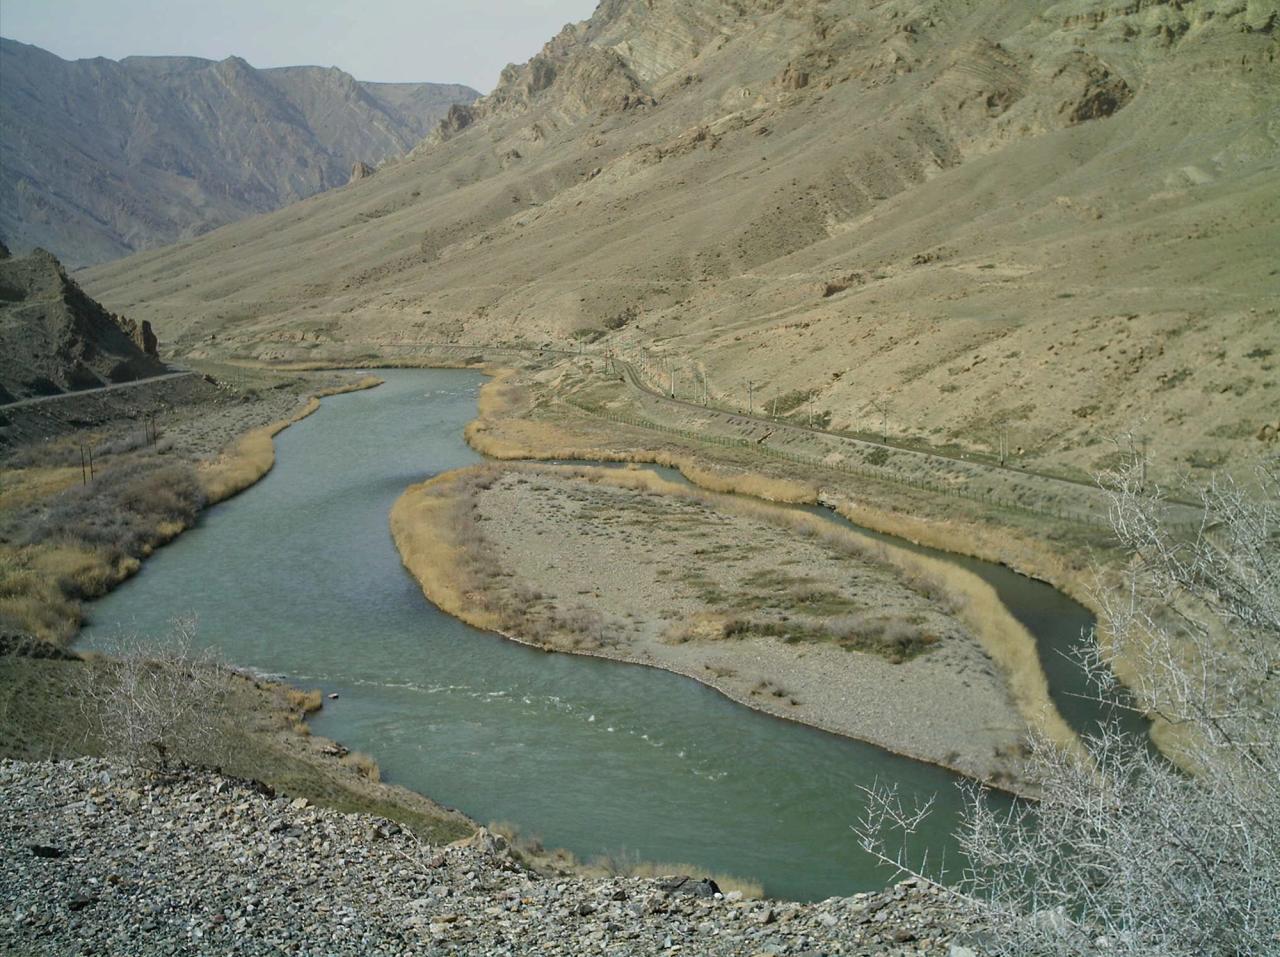 Aras river in the vicinity of Jolfa in Iran (Left hand Iran - Right hand Nakhichevan)